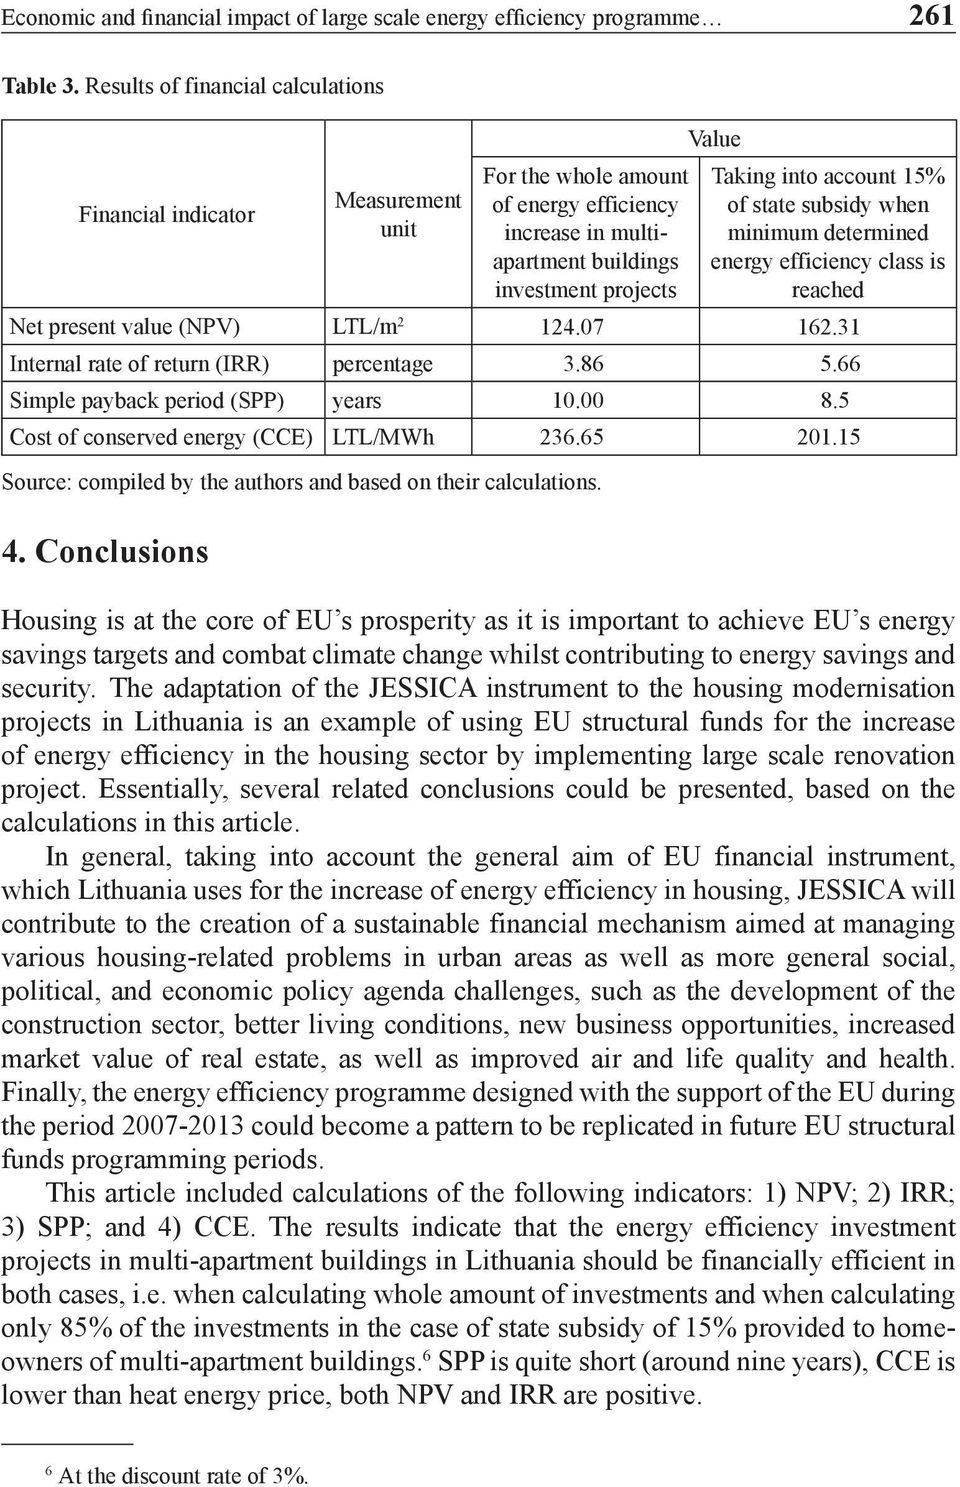 of state subsidy when minimum determined energy efficiency class is reached Net present value (NPV) LTL/m 2 124.07 162.31 Internal rate of return (IRR) percentage 3.86 5.